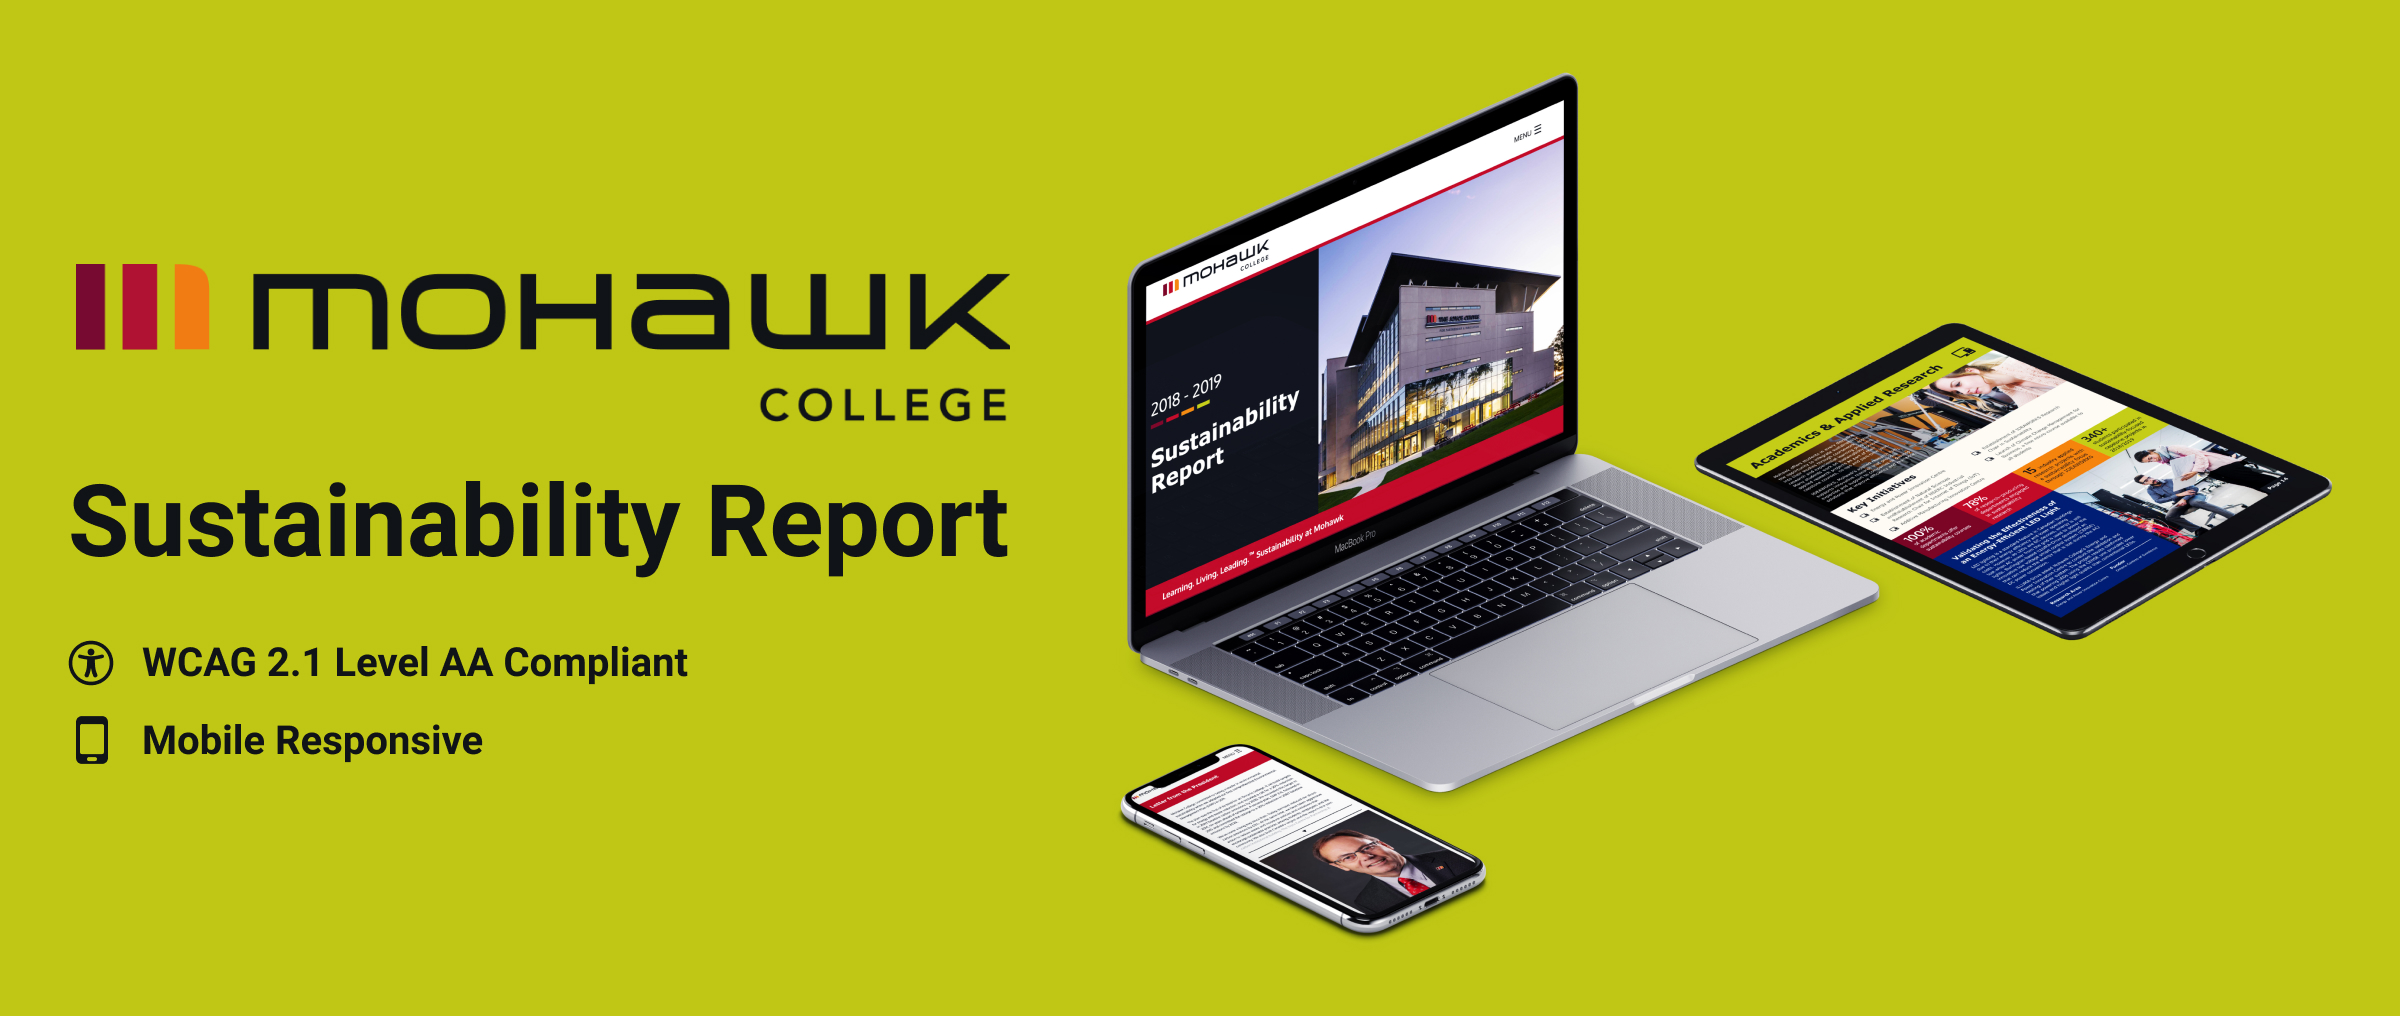 Mohawk College Sustainability Report. WCAG 2.1 Level AA Compliant. Mobile Responsive.